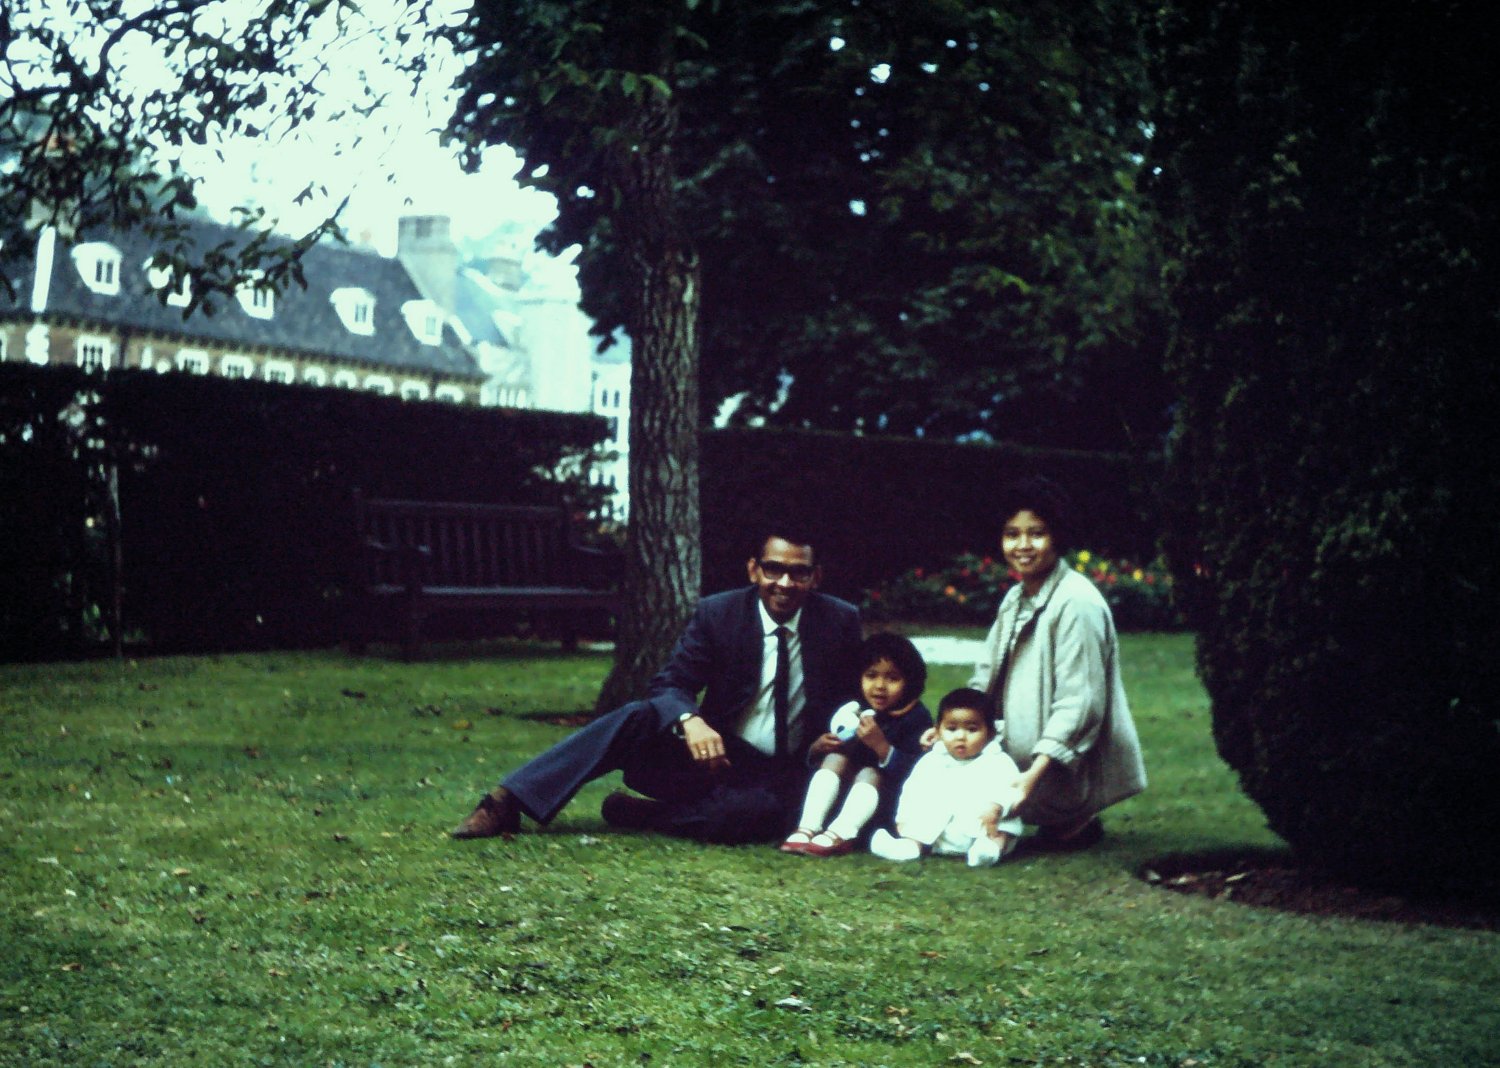 The family in England in 1967